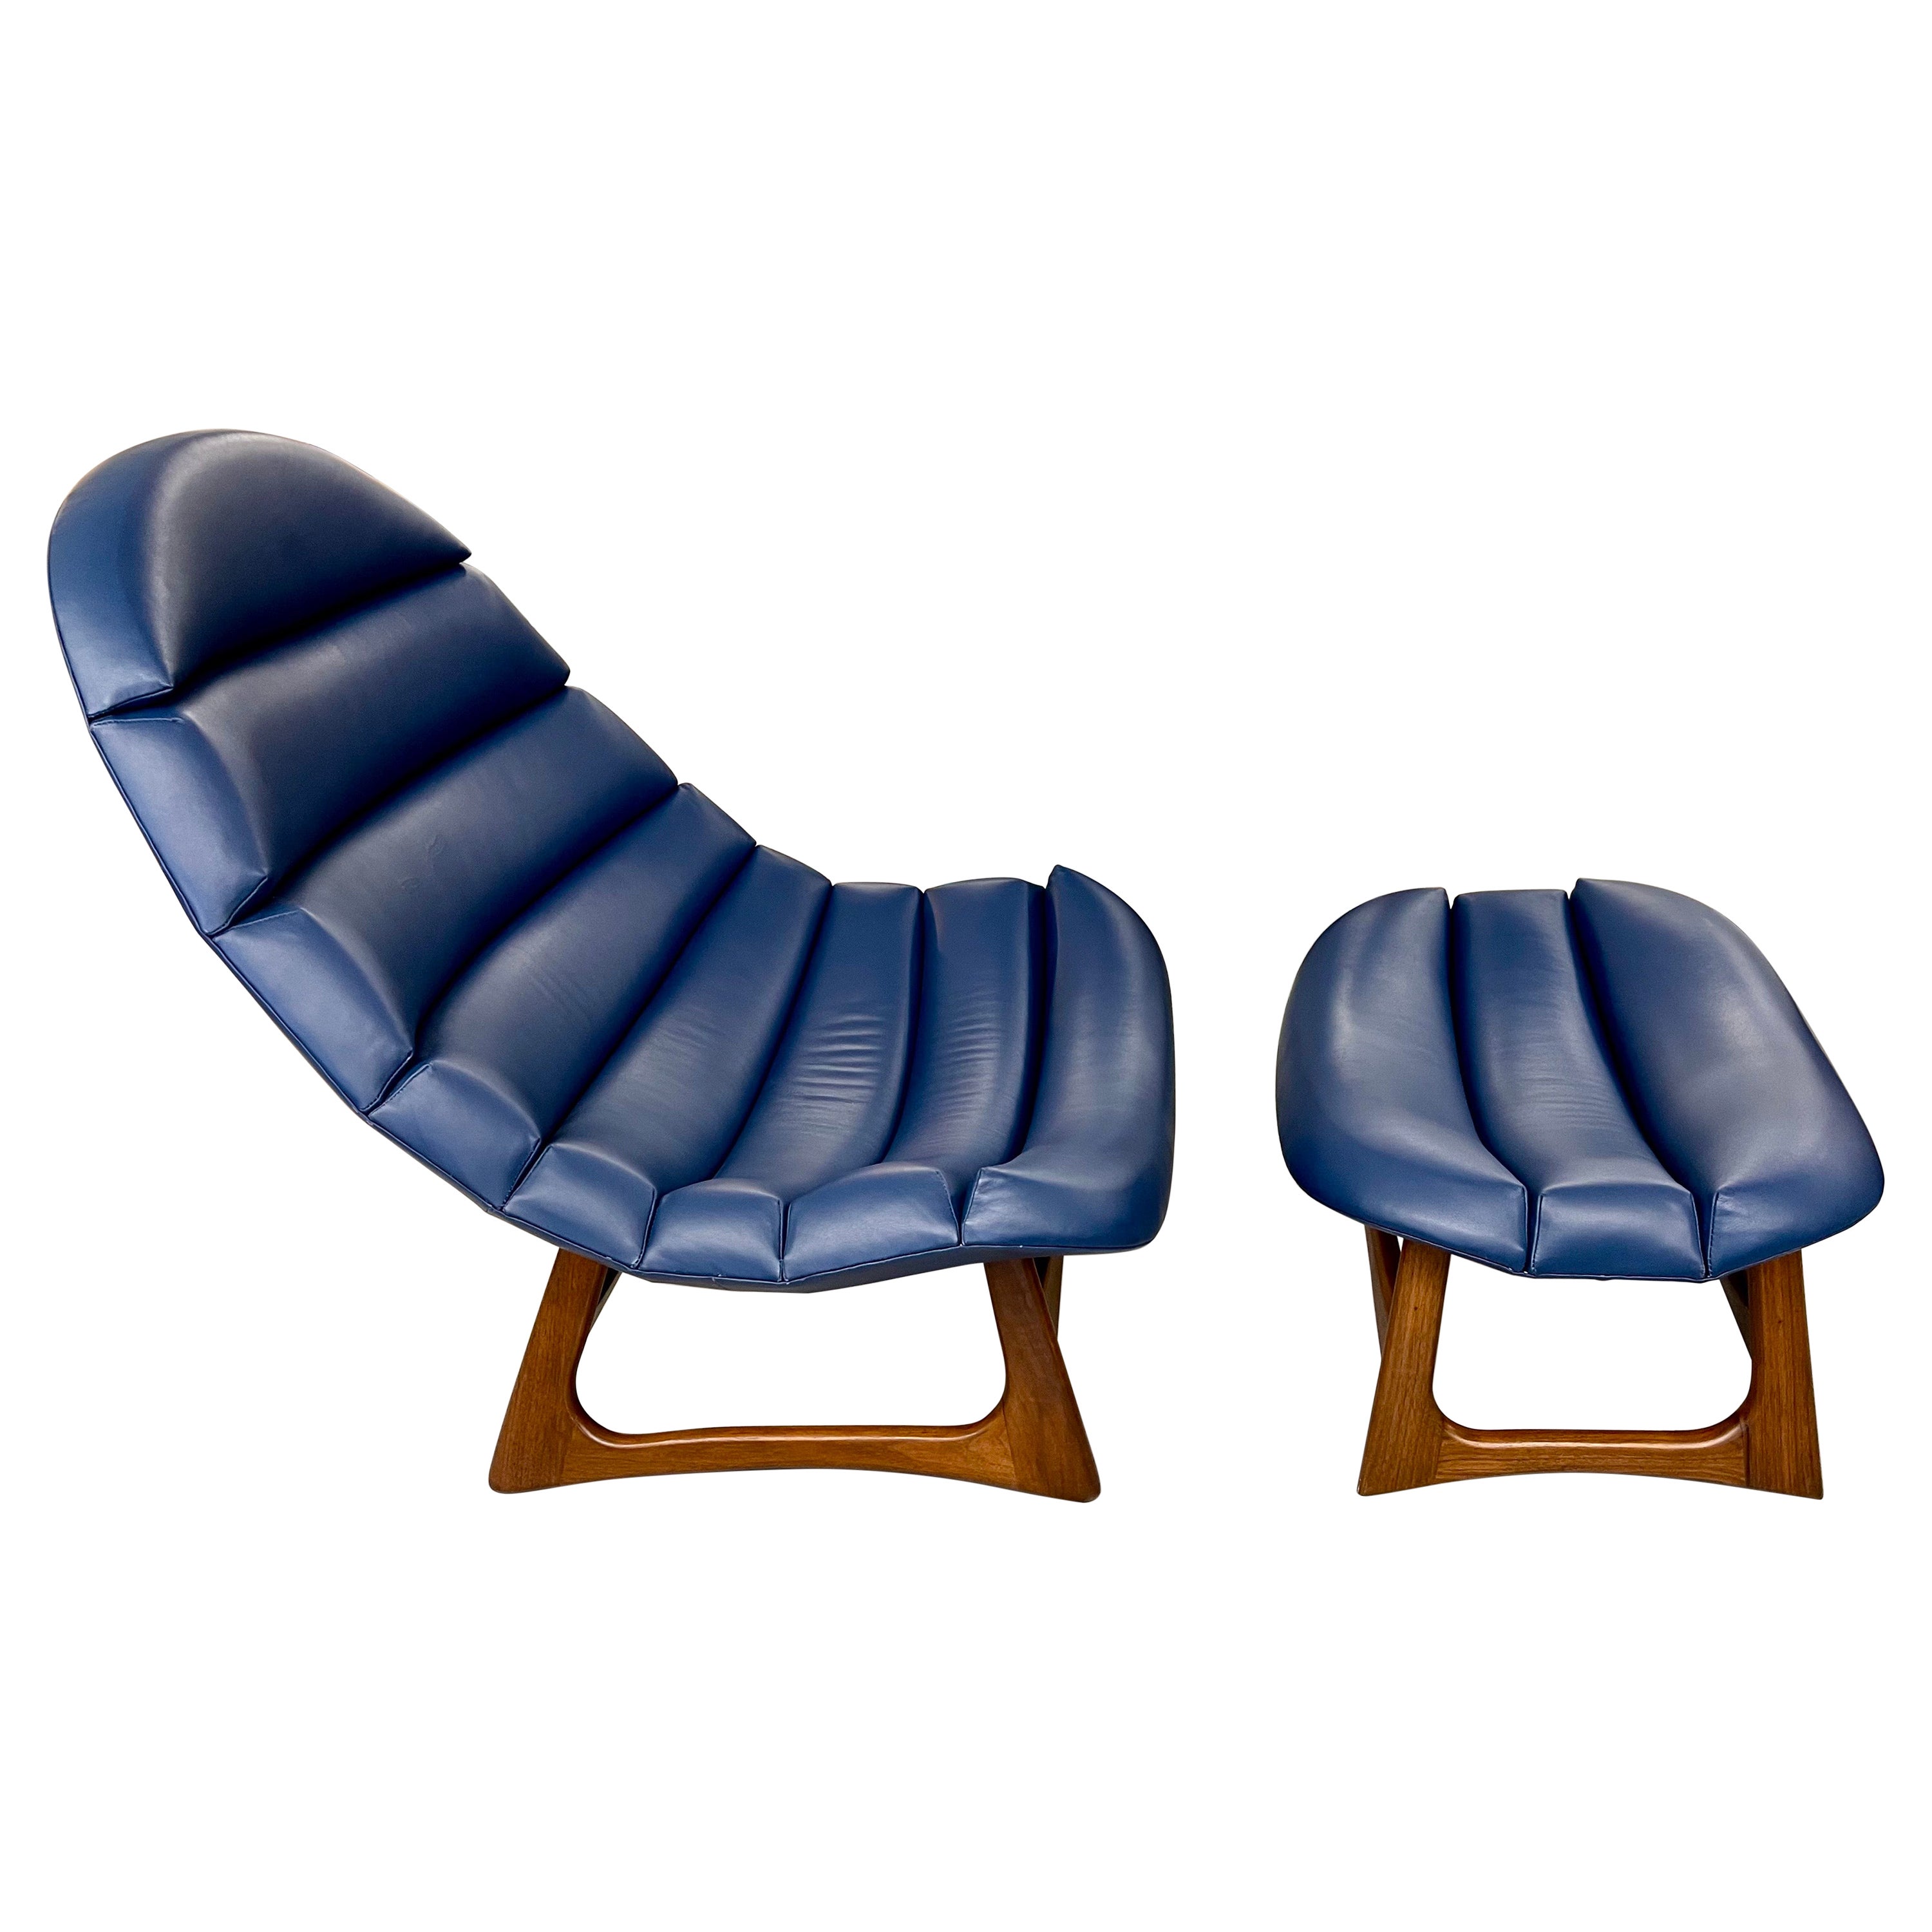 Adrian Pearsall Leather Lounge Chair and Ottoman